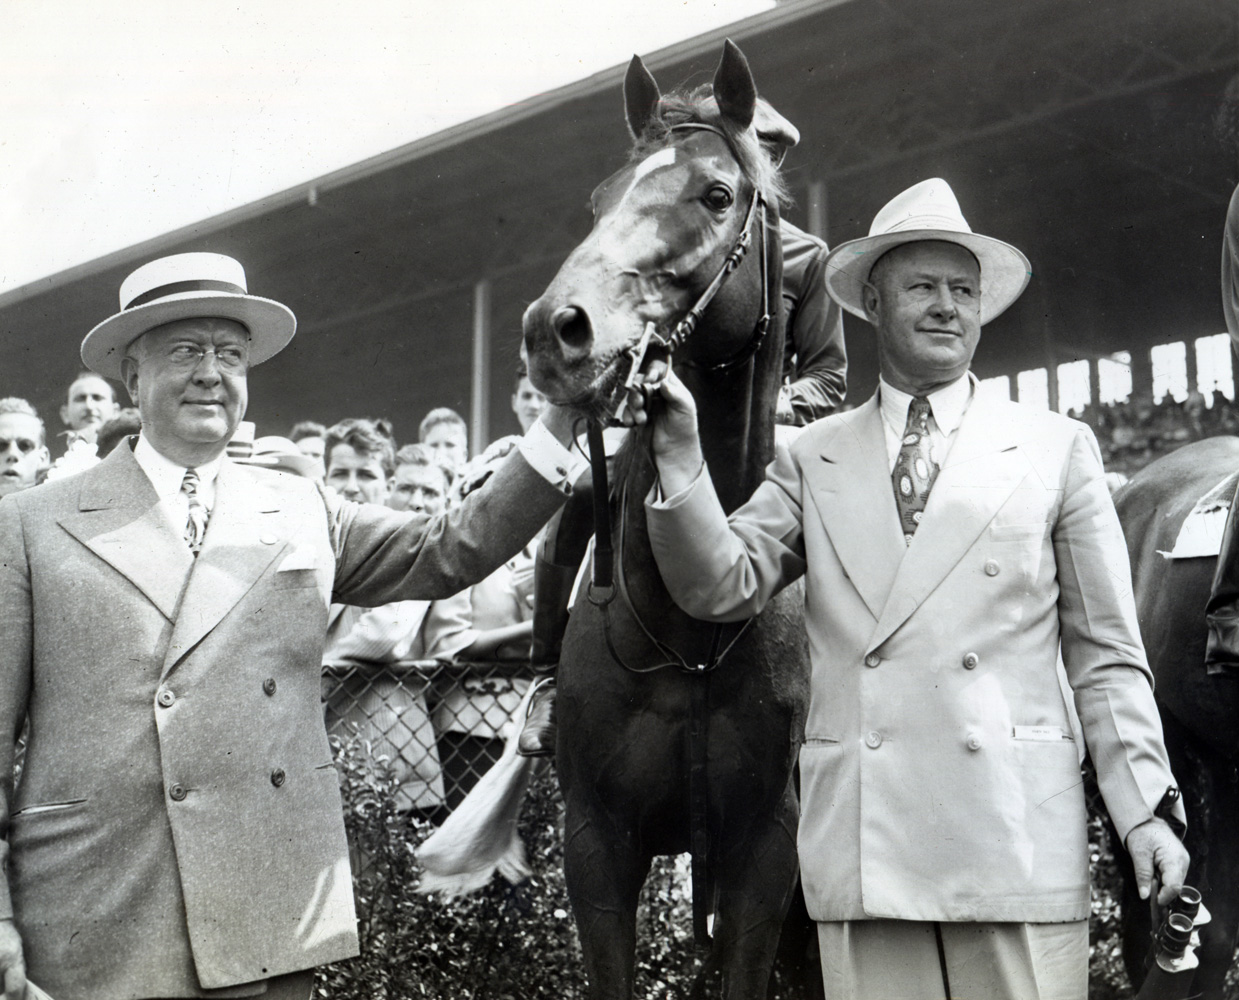 Warren Wright with Whirlaway and Ben Jones at Arlington for his last race in July 1943 (Washington Park Photo/Museum Collection)